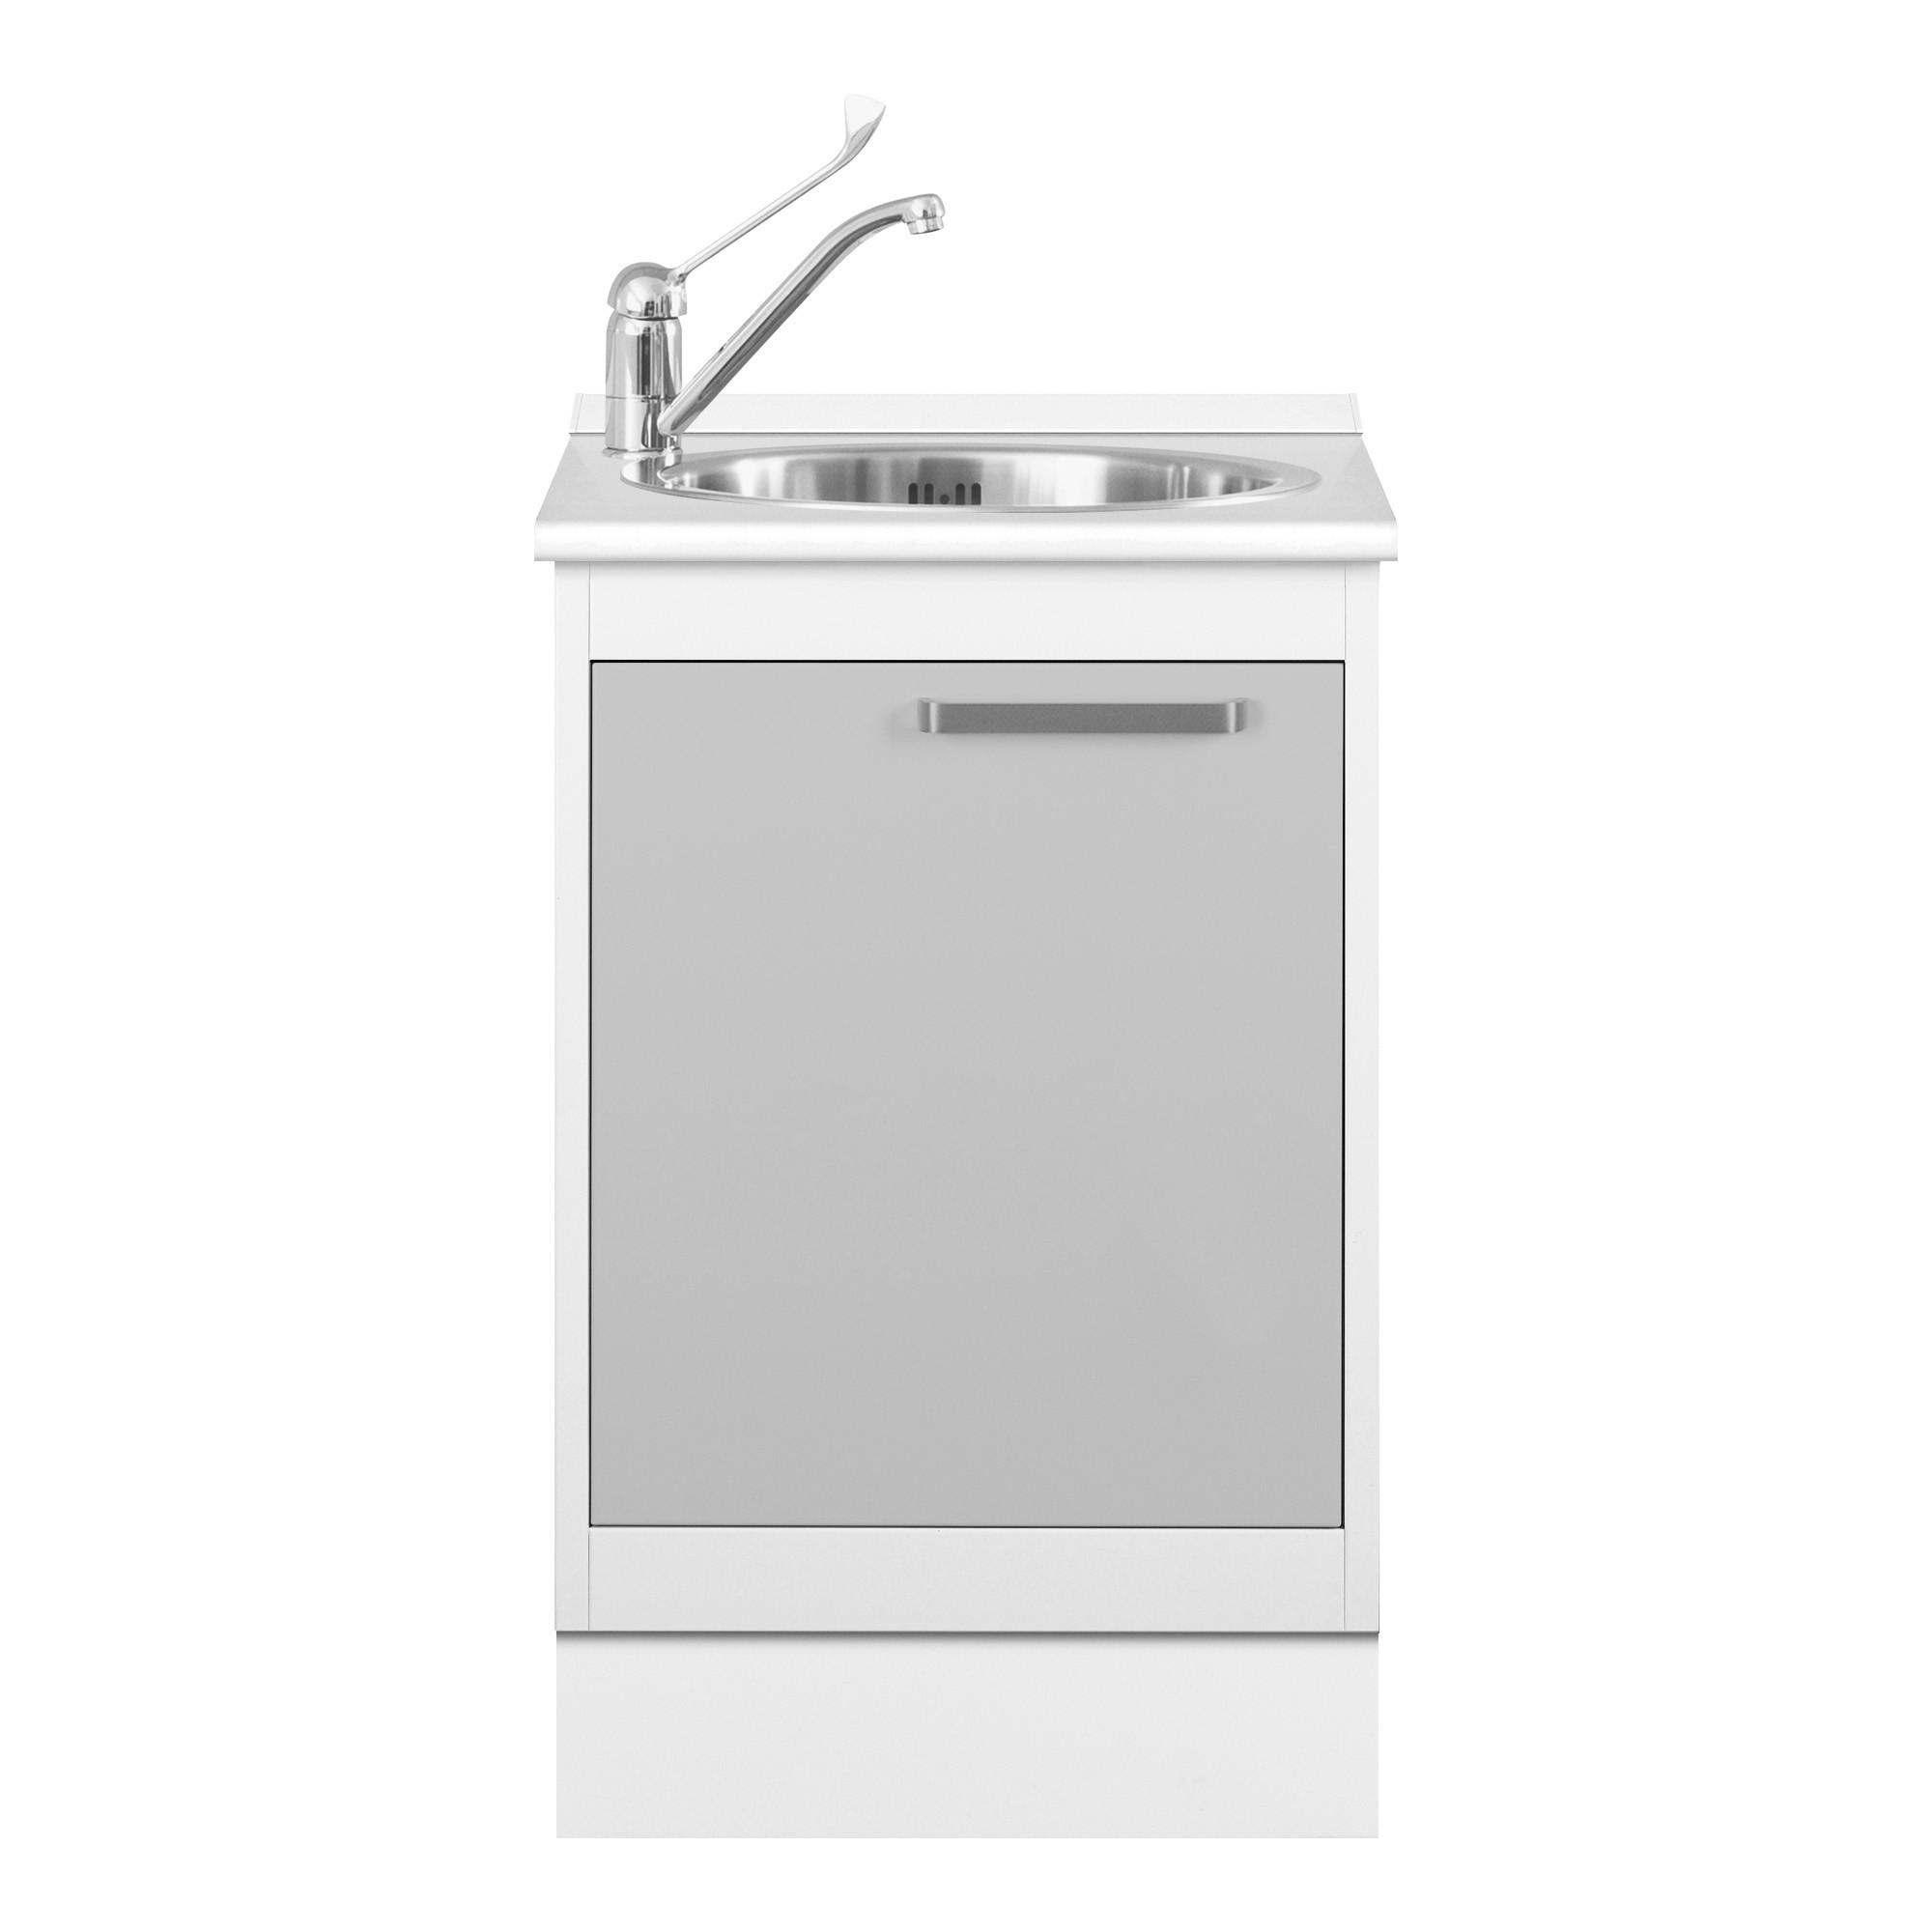 Module with stainless steel sink, mixer tap and skirting board